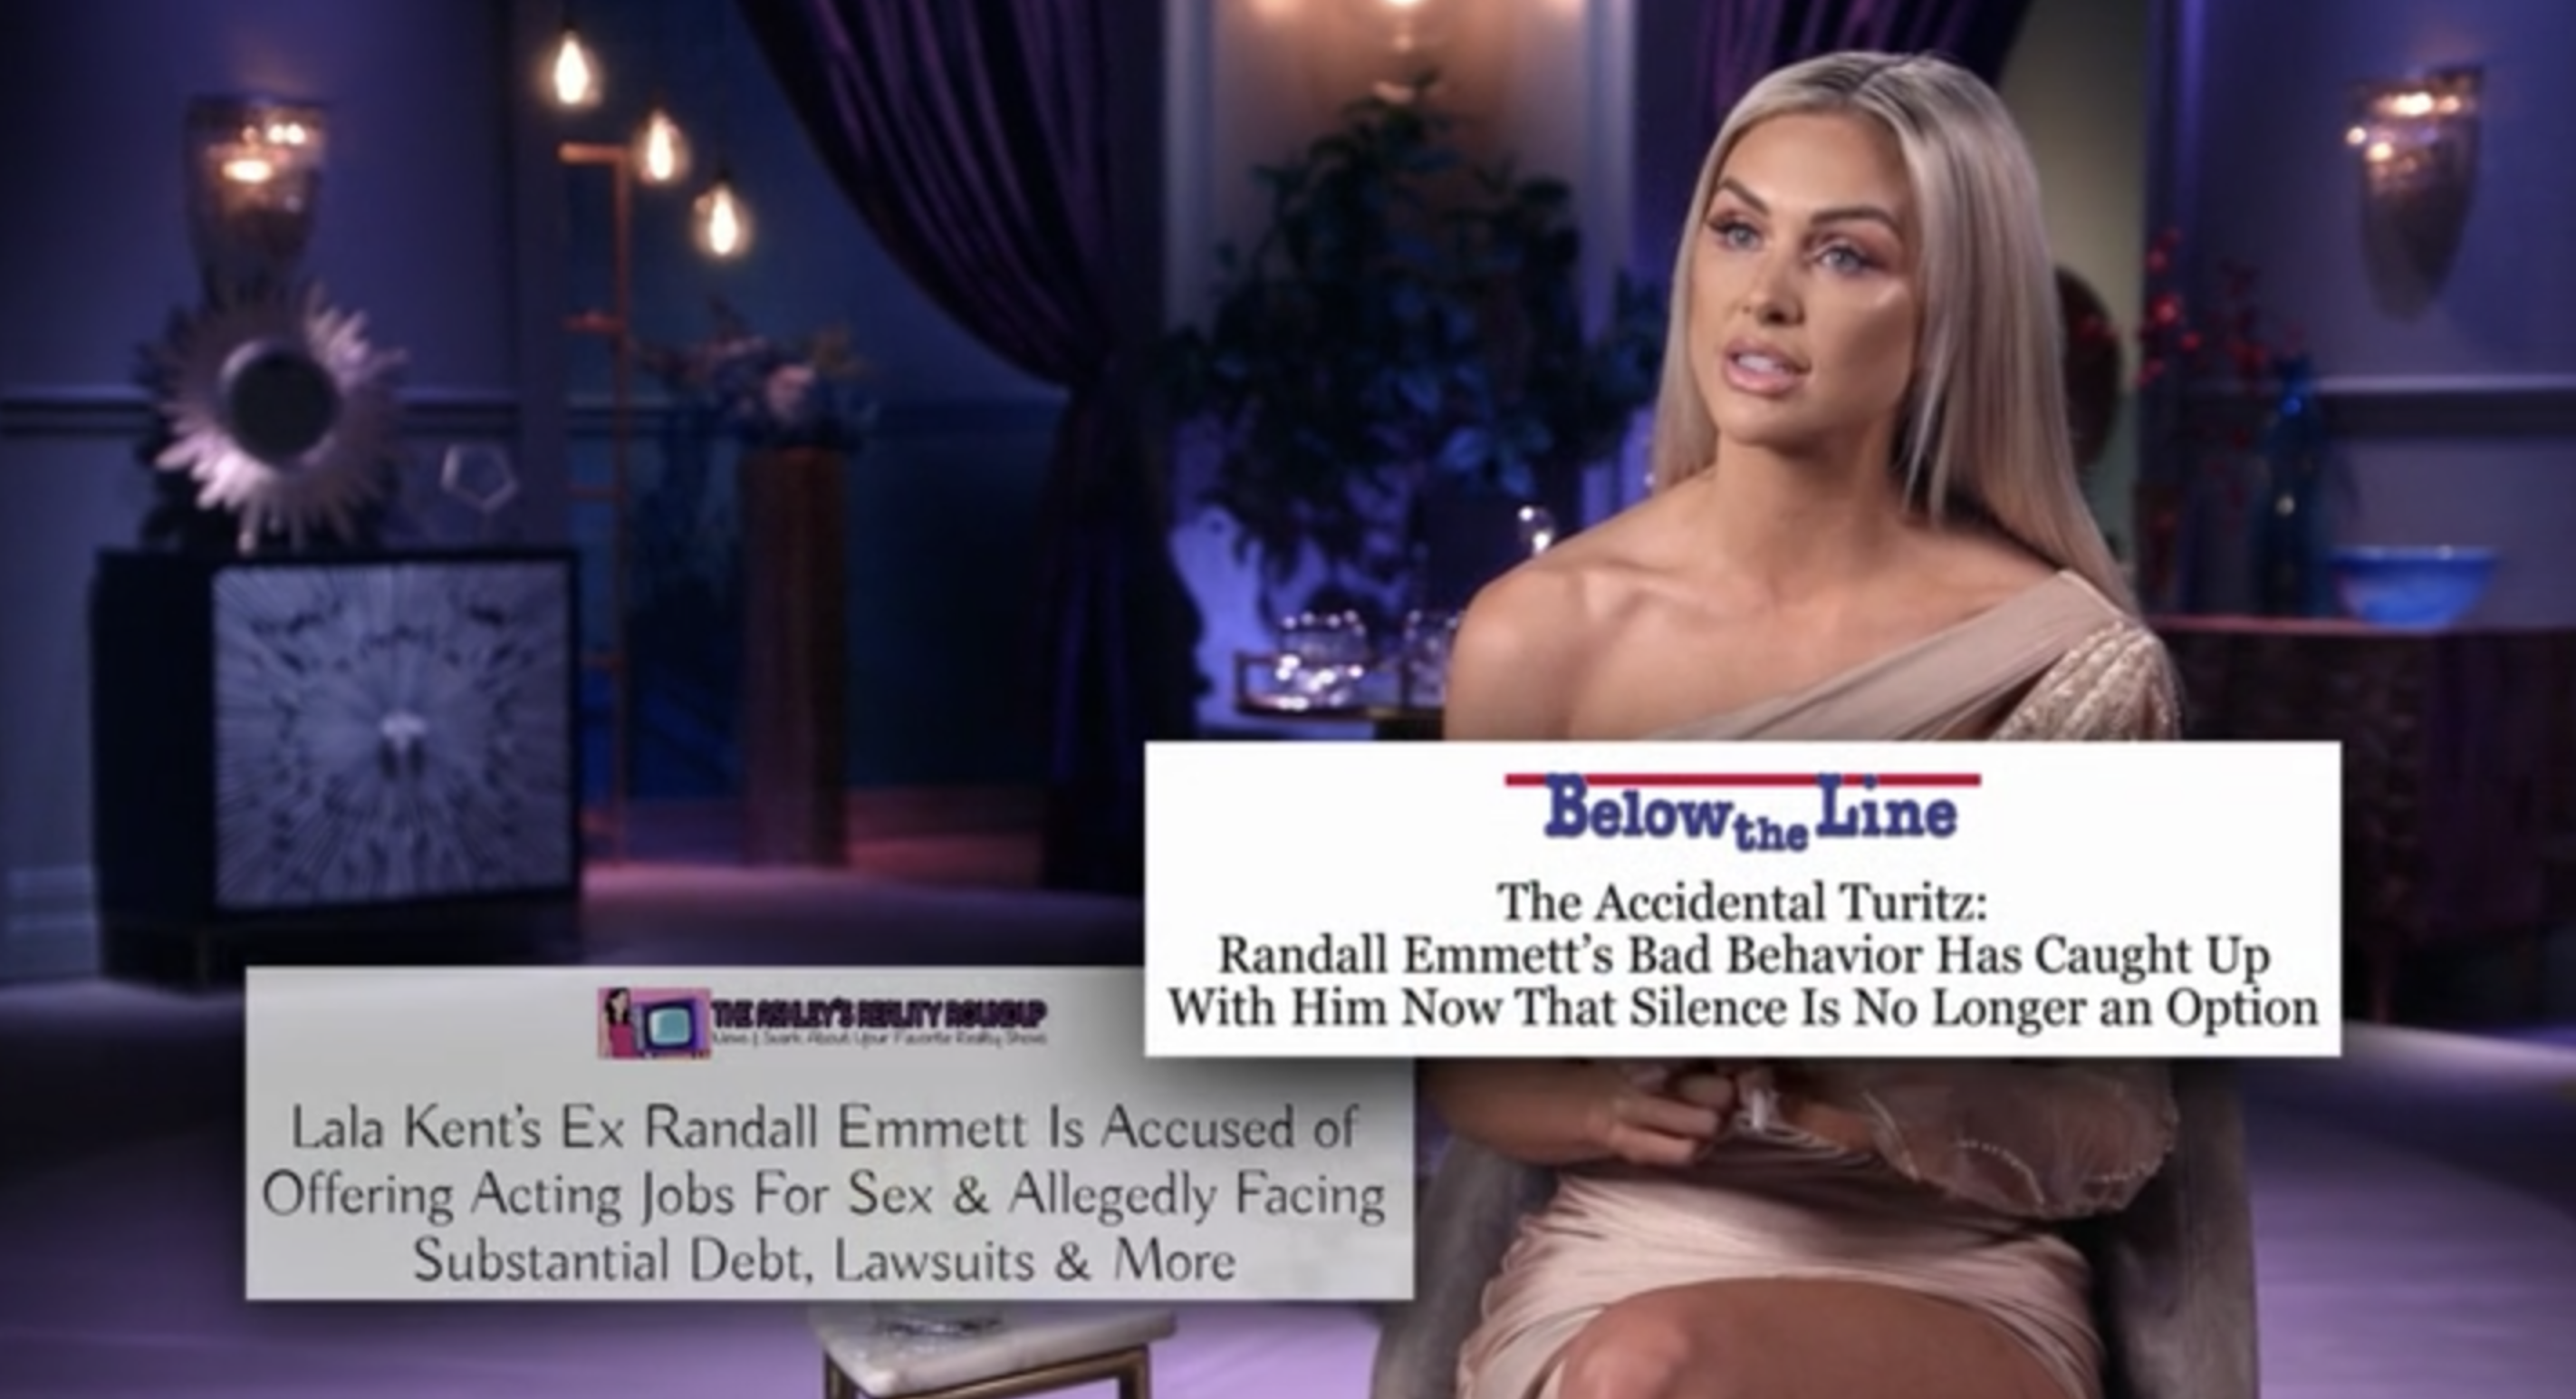 A shot of Lala giving a VPR talking-head interview, with headlines on screen about her ex Randall Emmett being accused of offering acting jobs for sex and facing debt and lawsuits